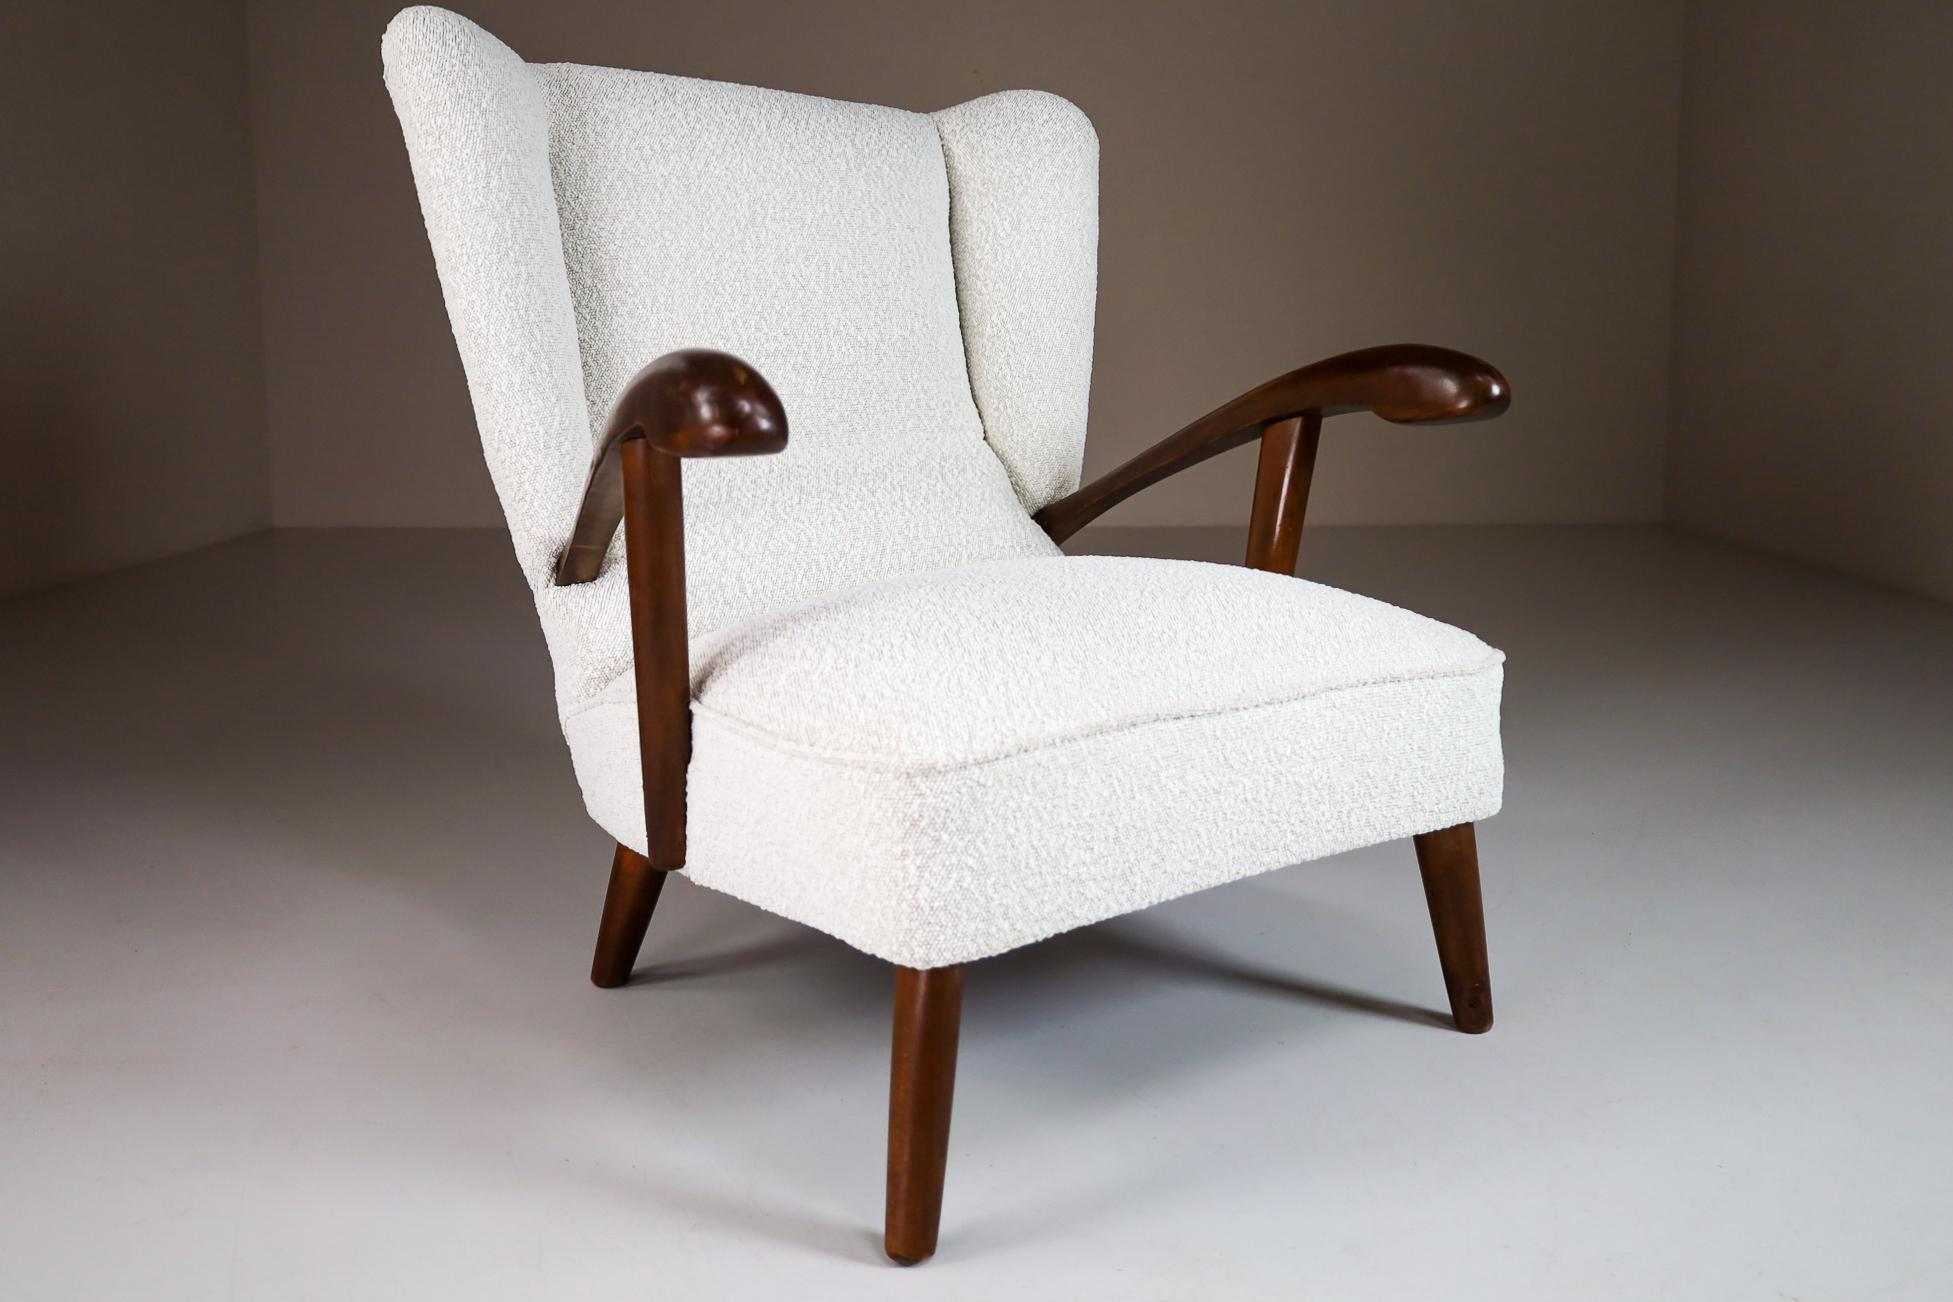 20th Century Sculptural Italian Wing Chair in Walnut & Reupholstered in Bouclé Wool Fabric